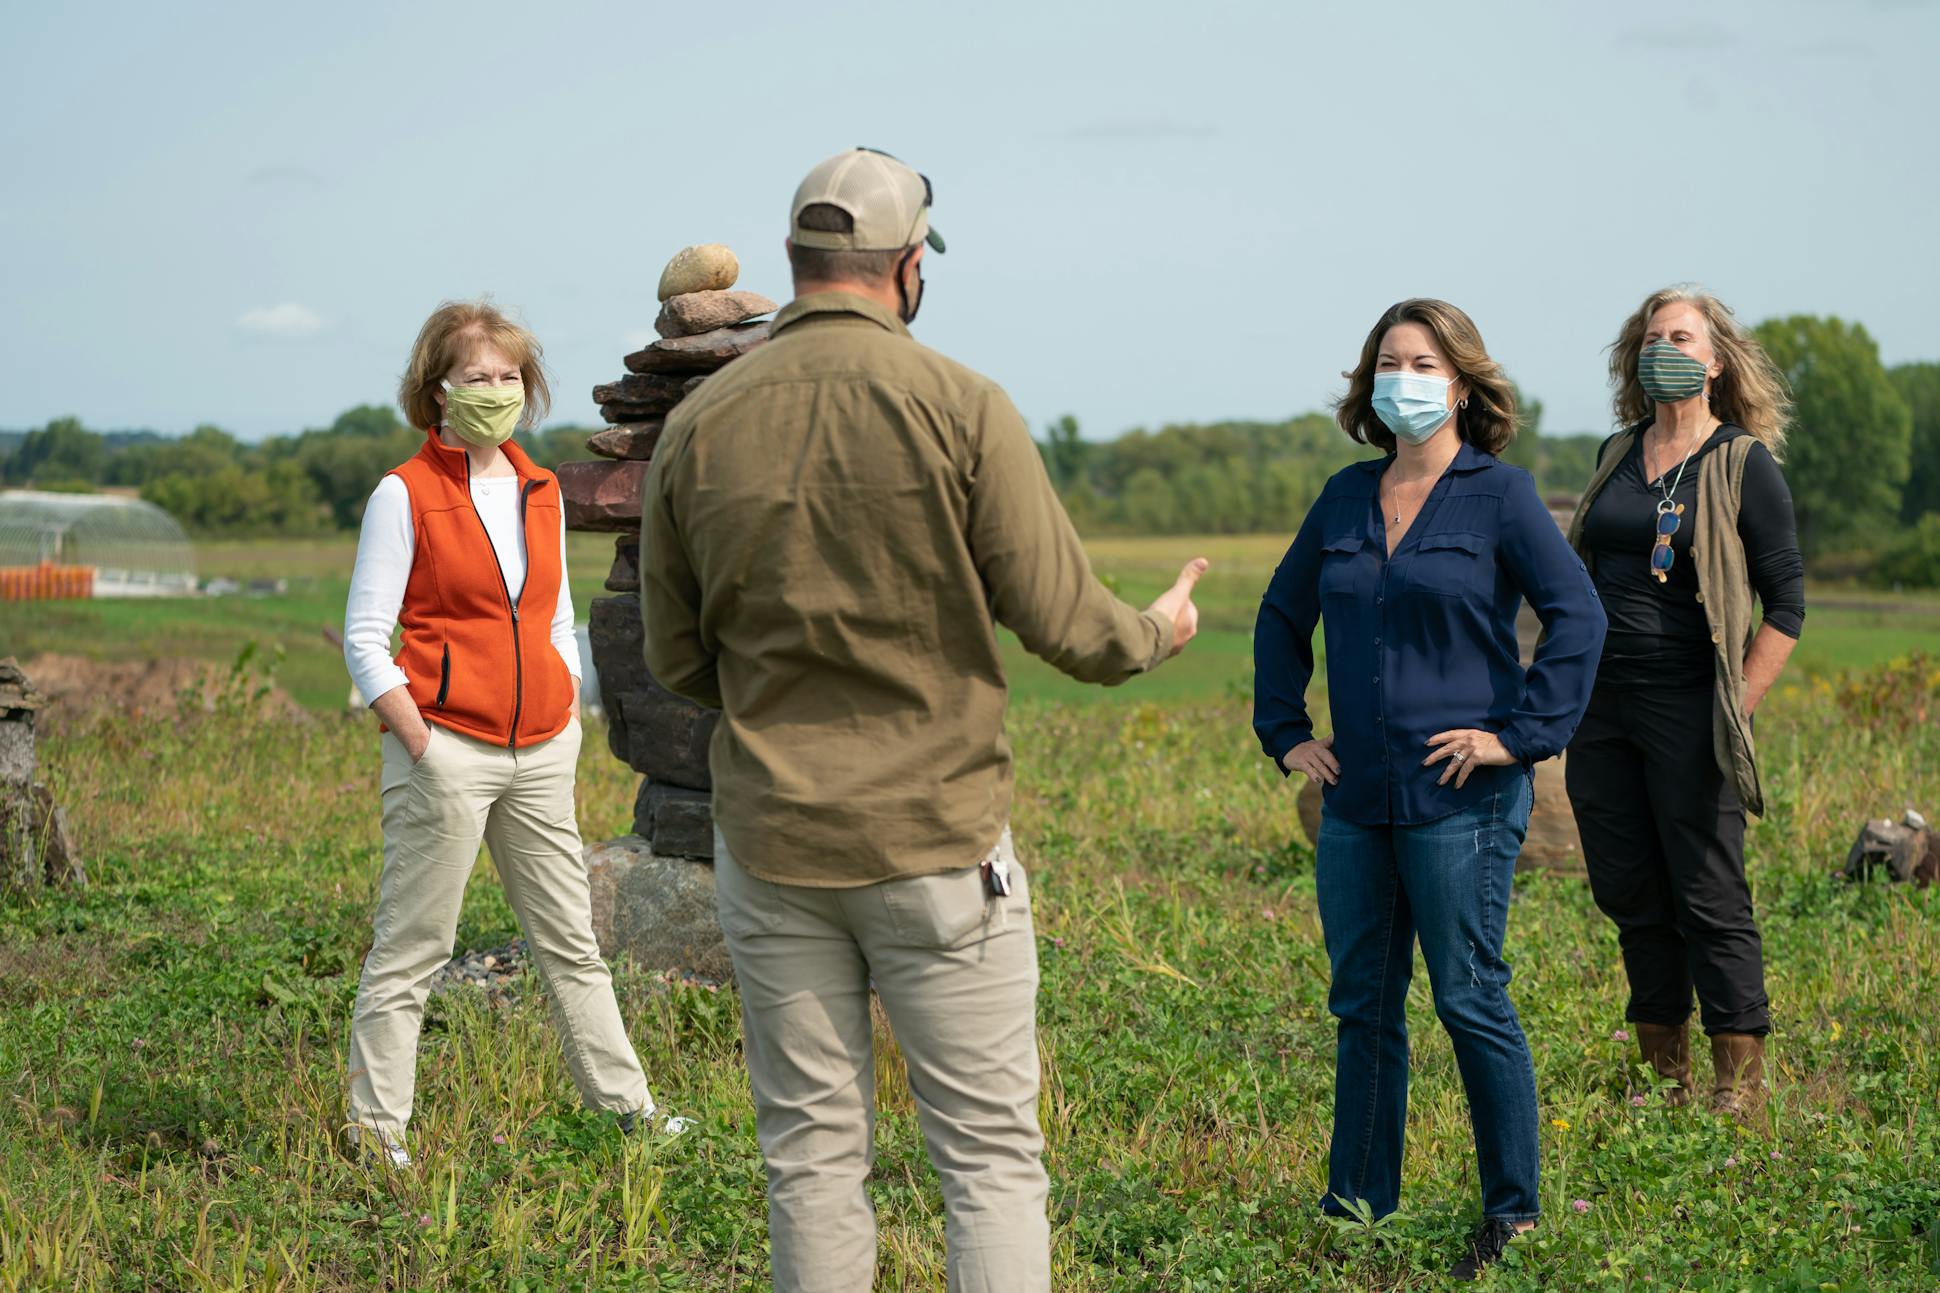 Sen. Tina Smith visited the Main Street Project Farm in Northfield, Minn., along with U.S. Rep. Angie Craig. They listened as co-farm manager Waytt Parks talked about the farm's mission.